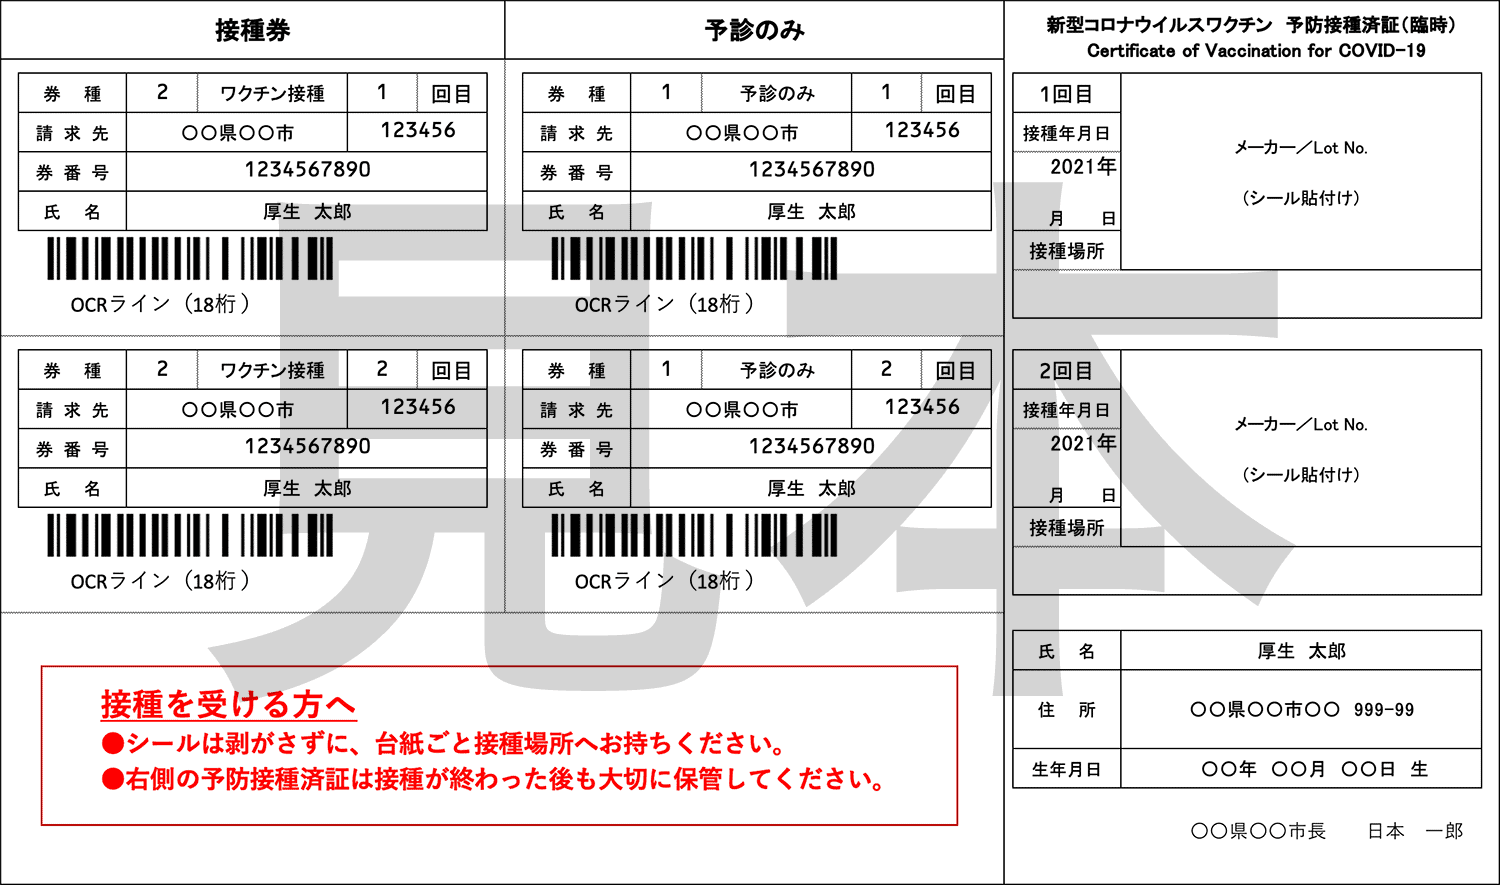 COVID-19 vaccines coupon distributed by the Japanese government